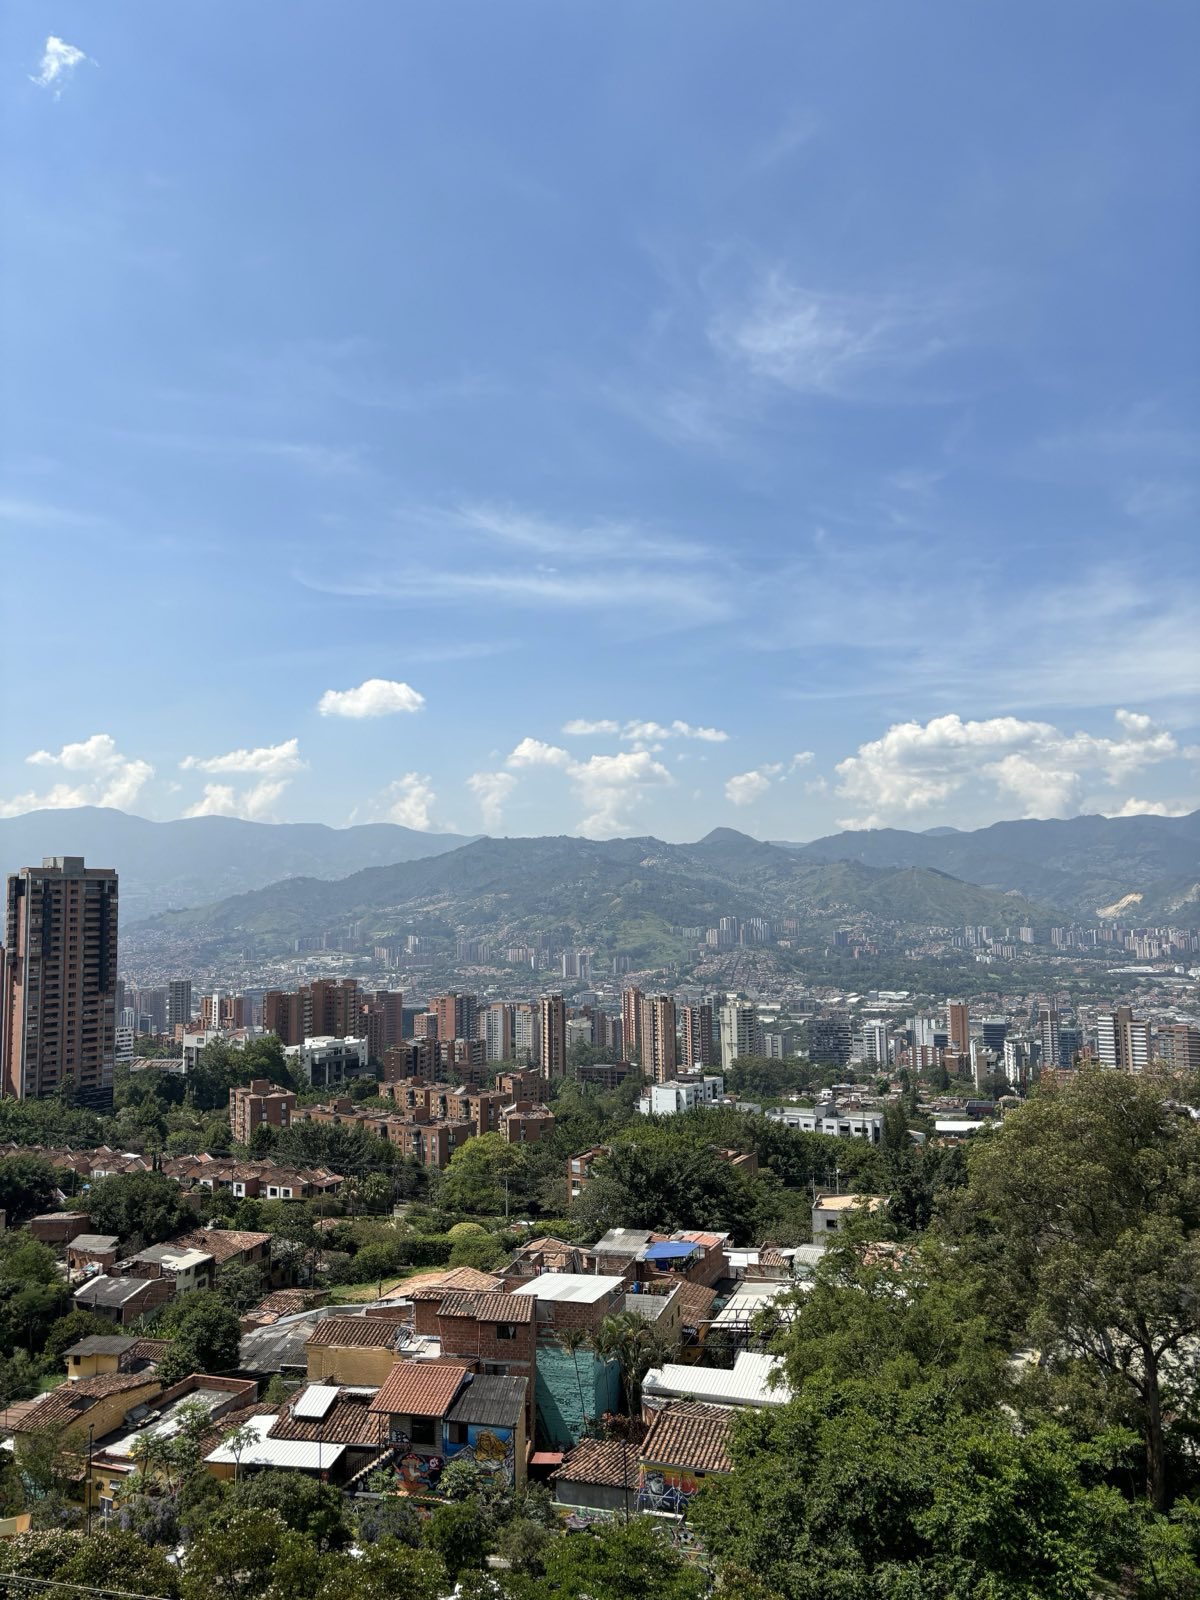 New Medellin Death – 25 Year Old Dies Appears Drugged – Foreign Tourist Safety Concerns in Medellin’s Hotels